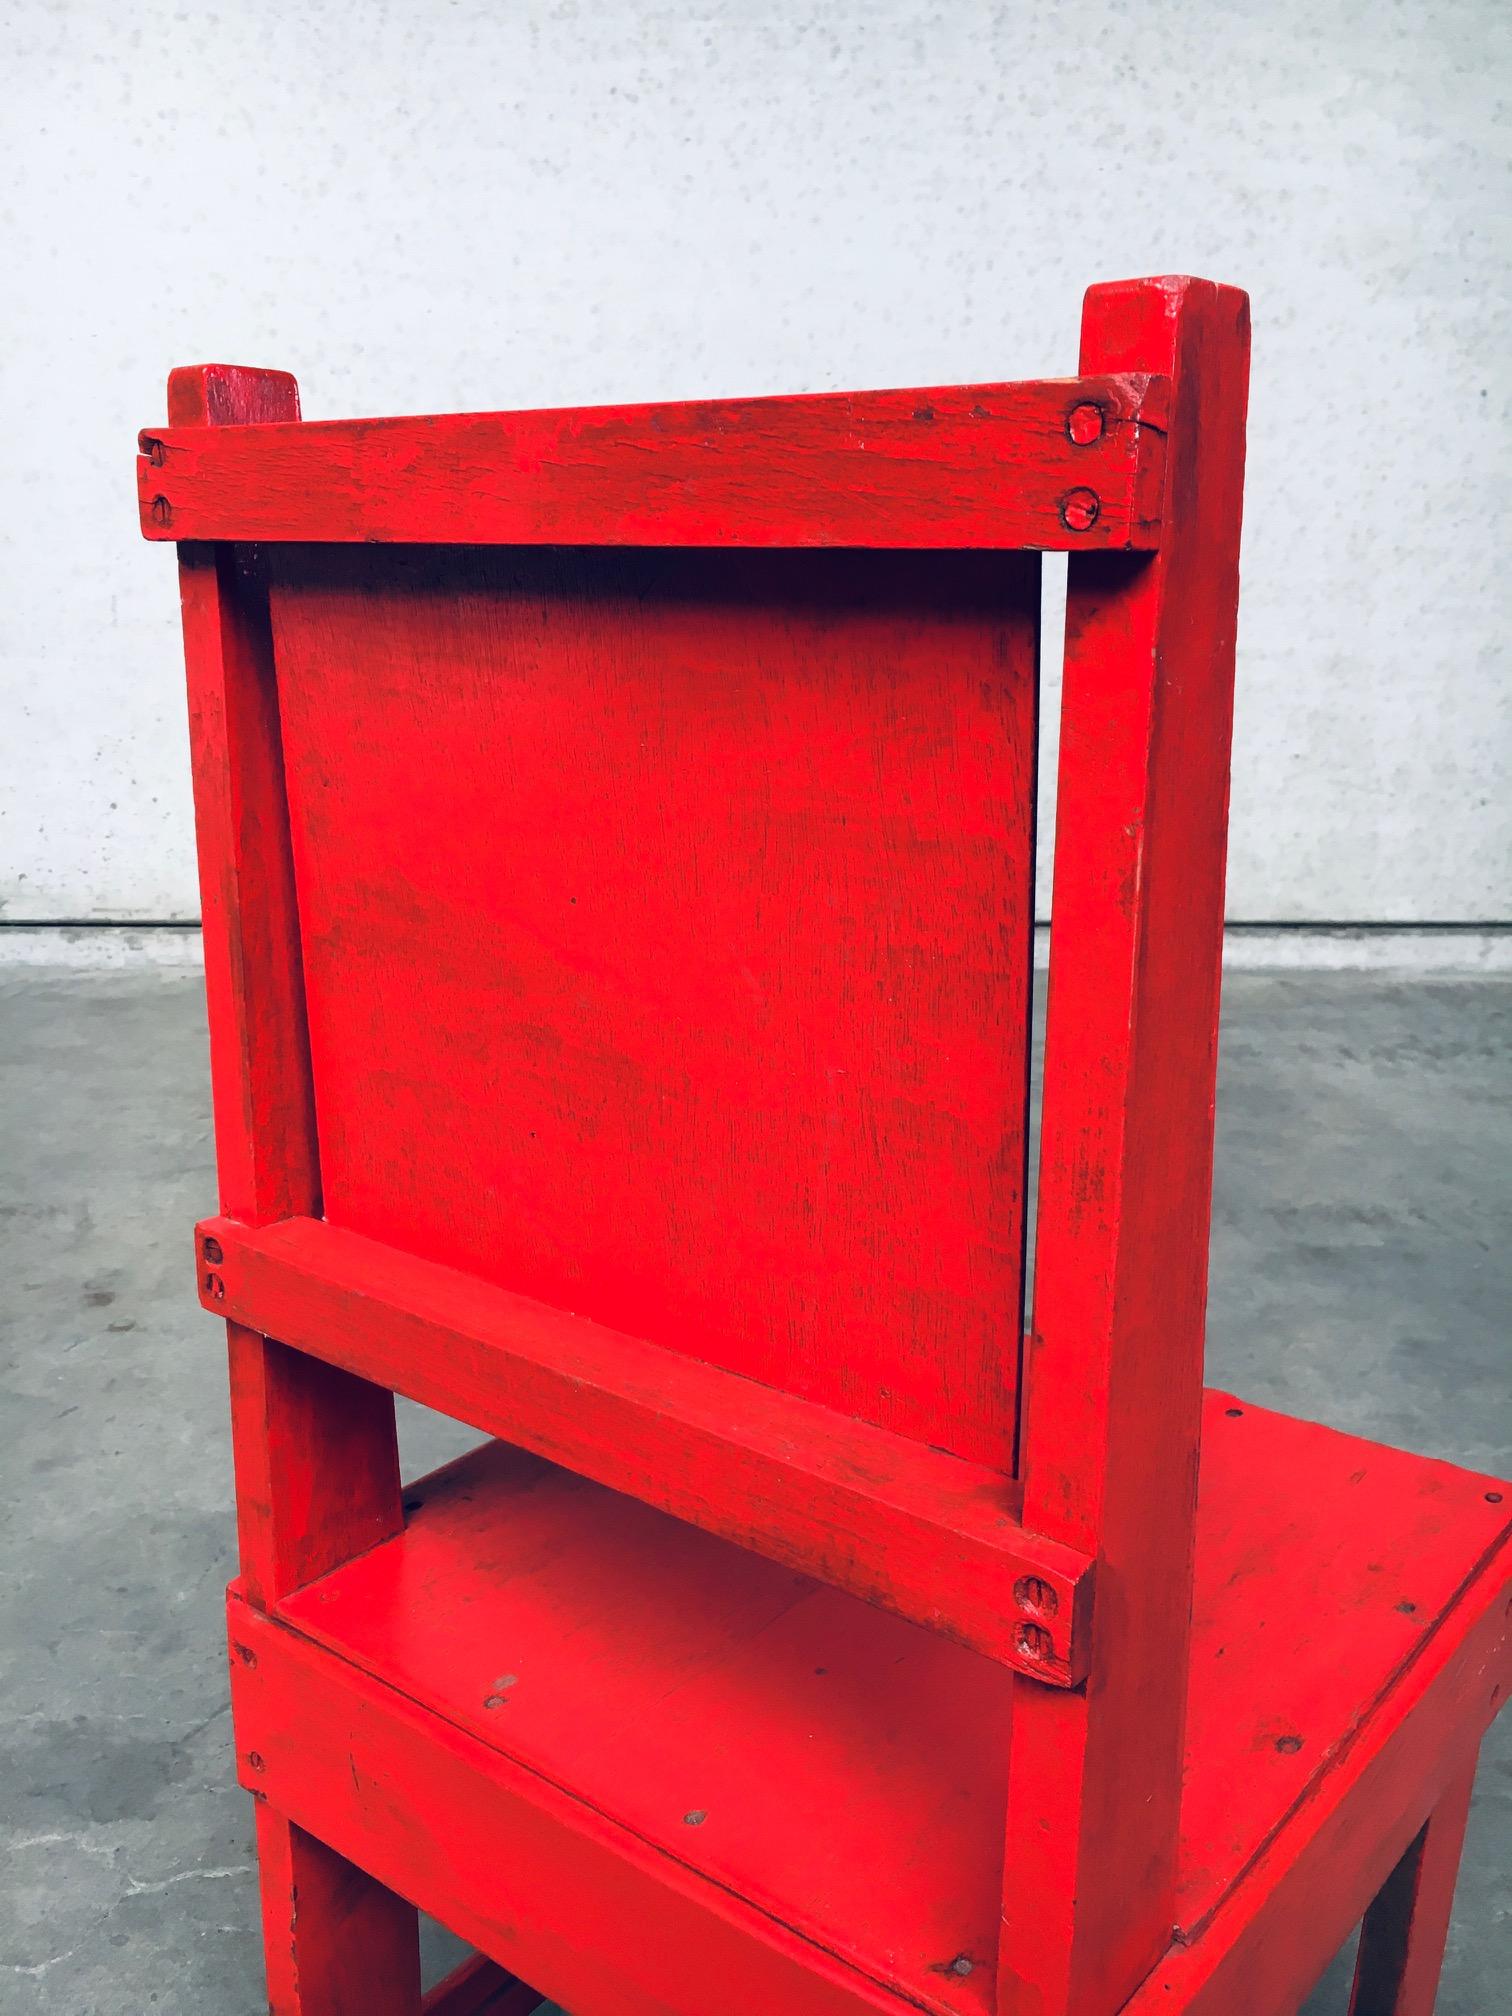 De Stijl Movement Design Red Chair Attributed to Jan Wils, 1920's Netherlands For Sale 12